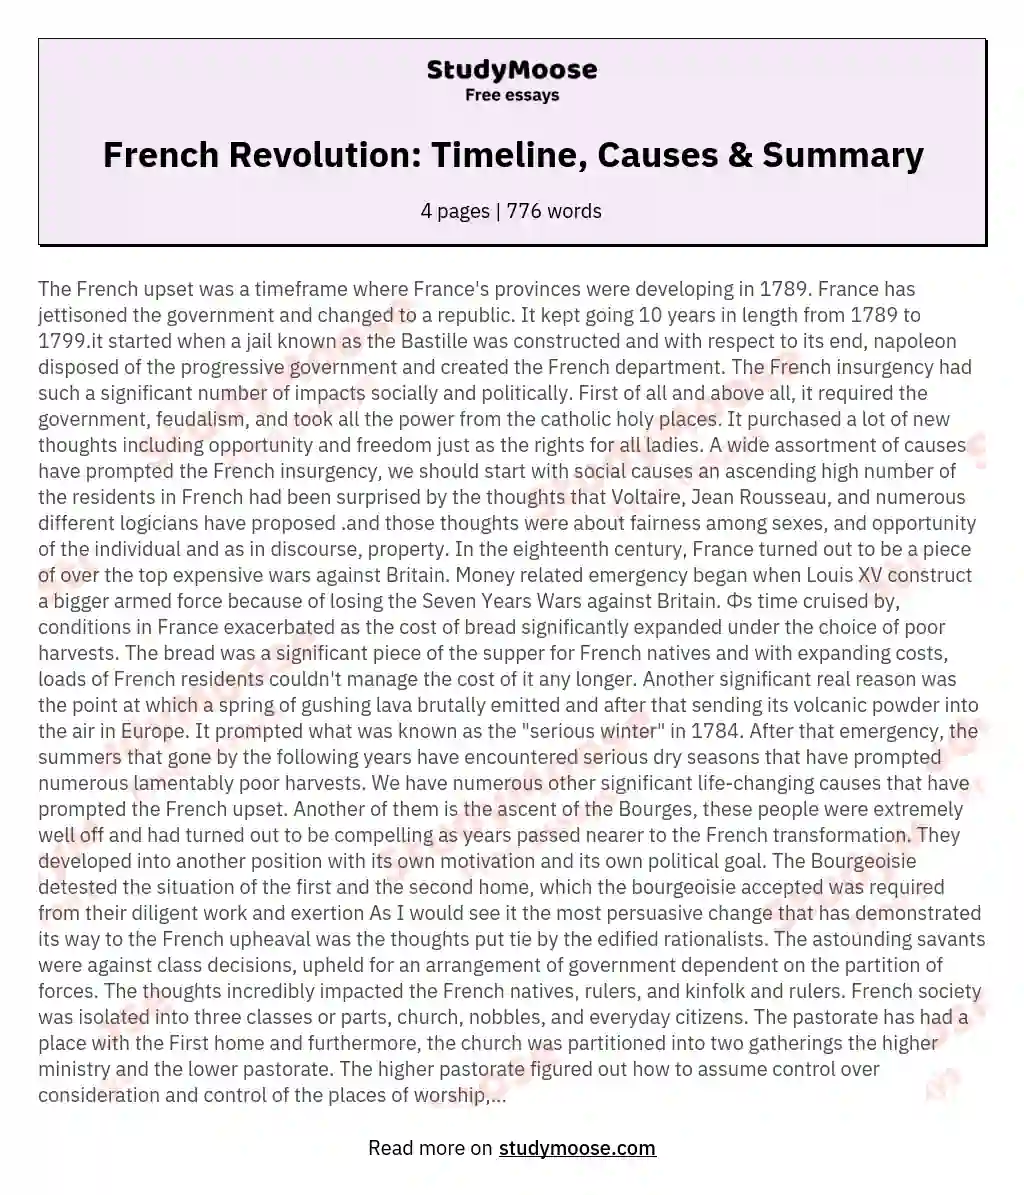 French Revolution: Timeline, Causes & Summary essay